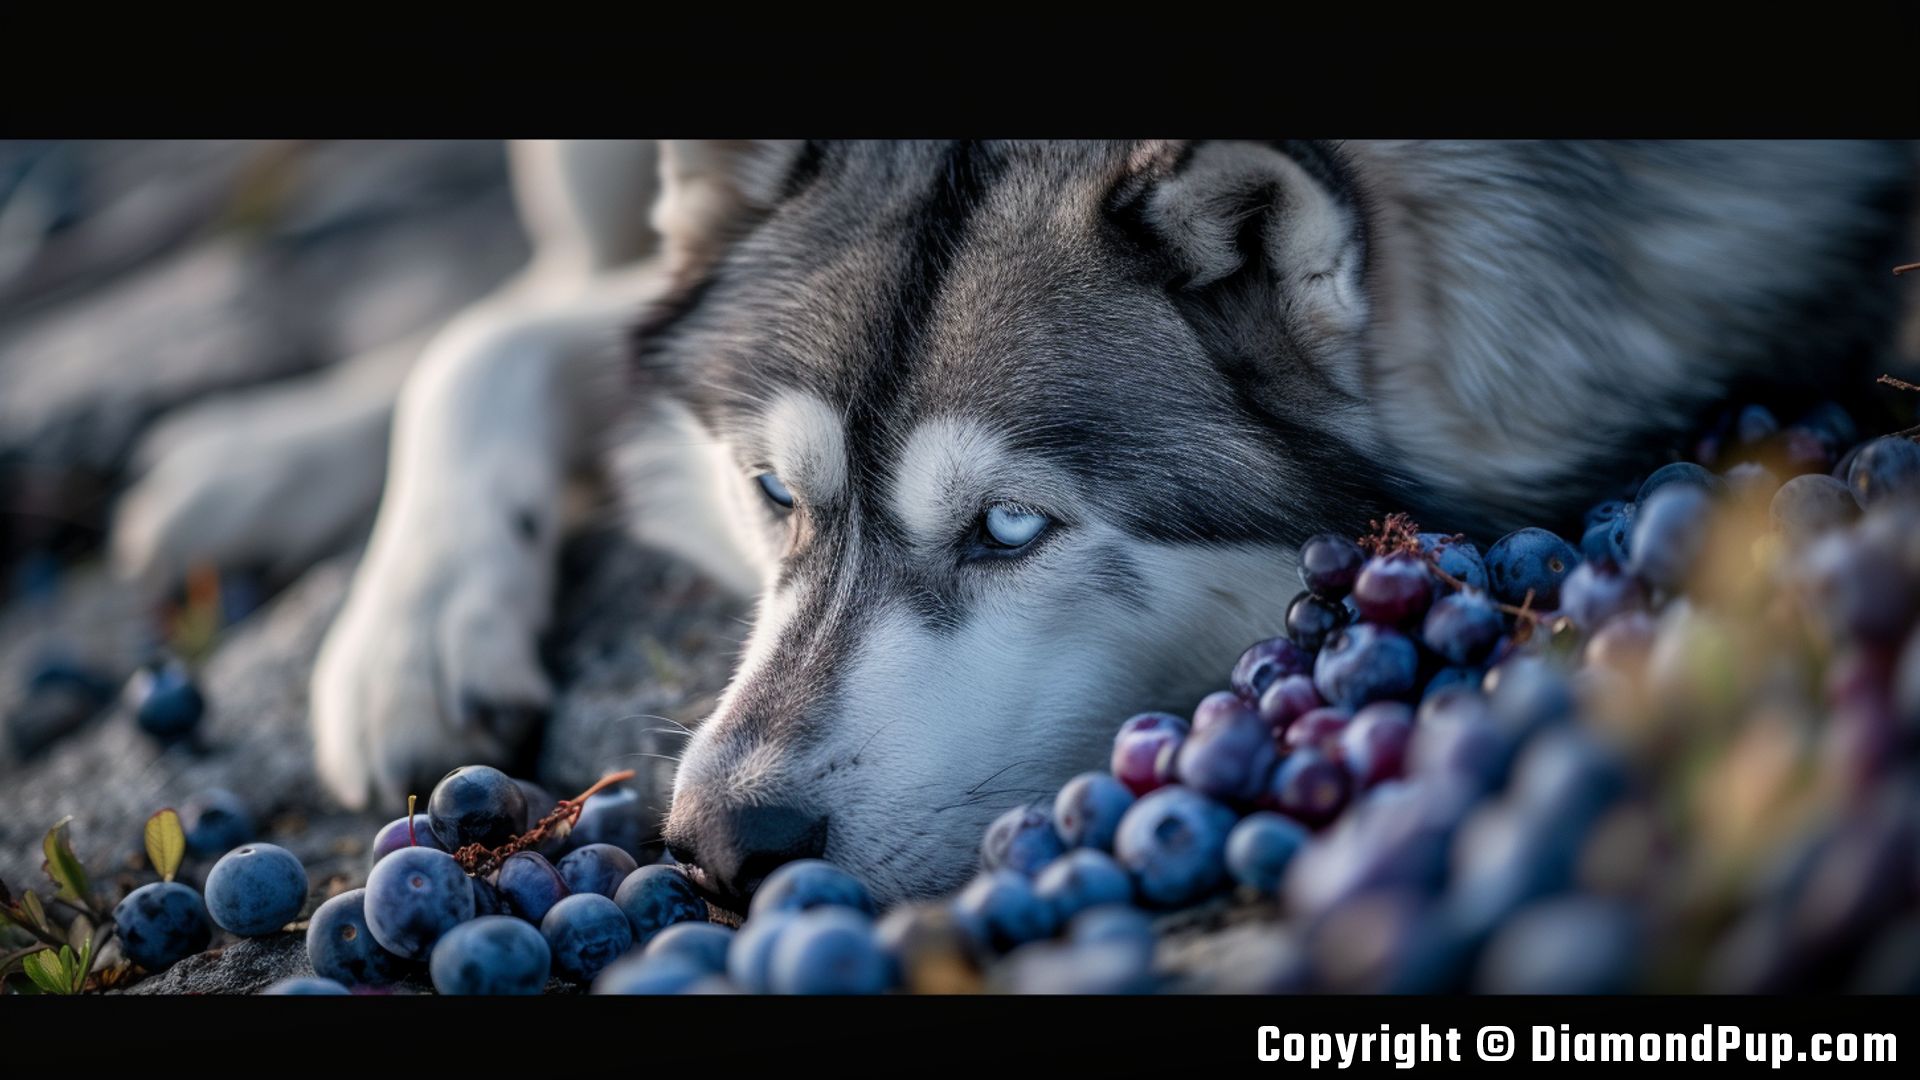 Photograph of an Adorable Husky Snacking on Blueberries